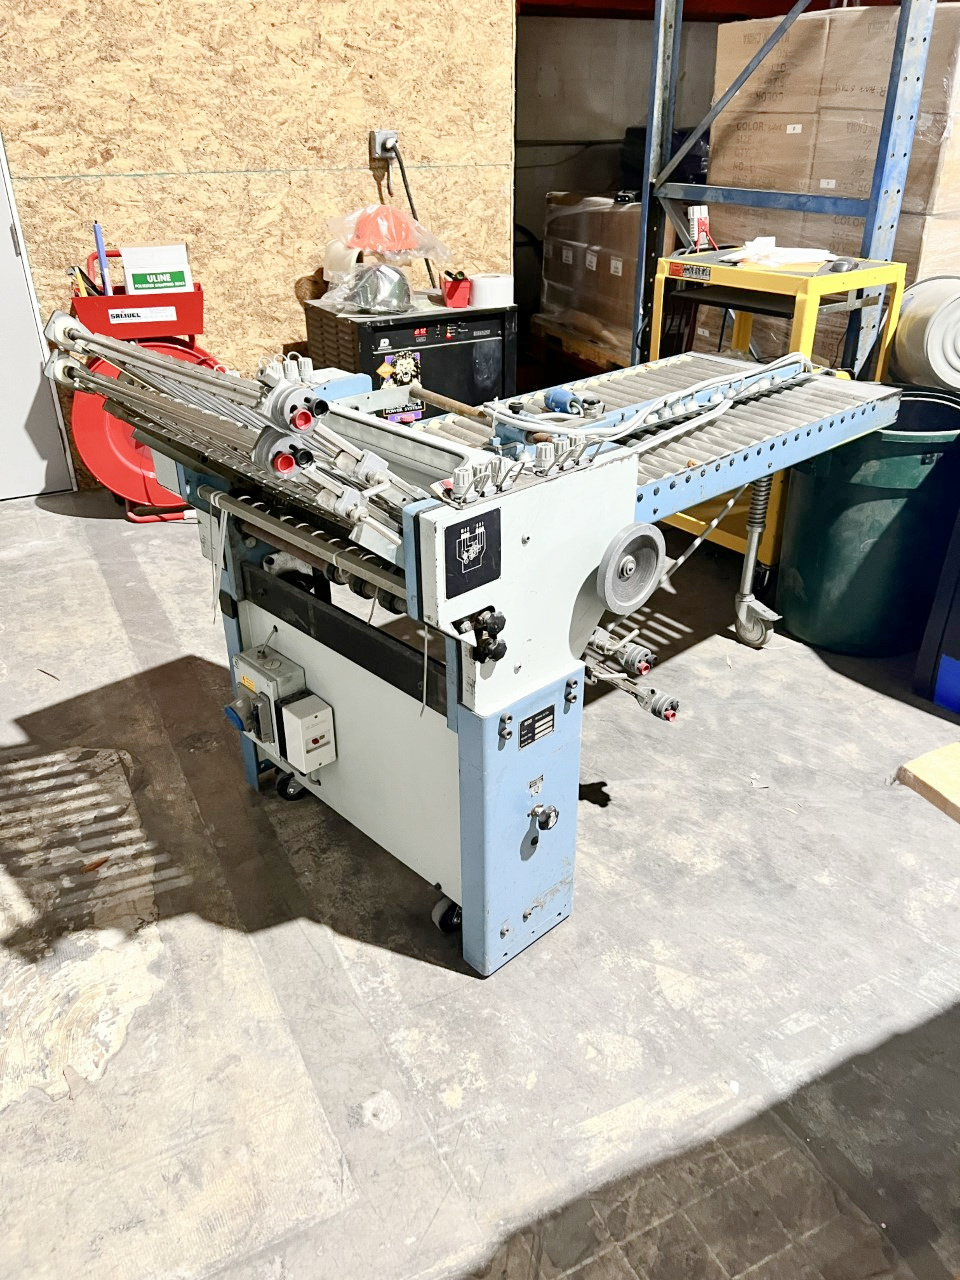 Equipment Lot: Thermotype & Thermography Machines (Used) Item # UE-080922B (Florida)